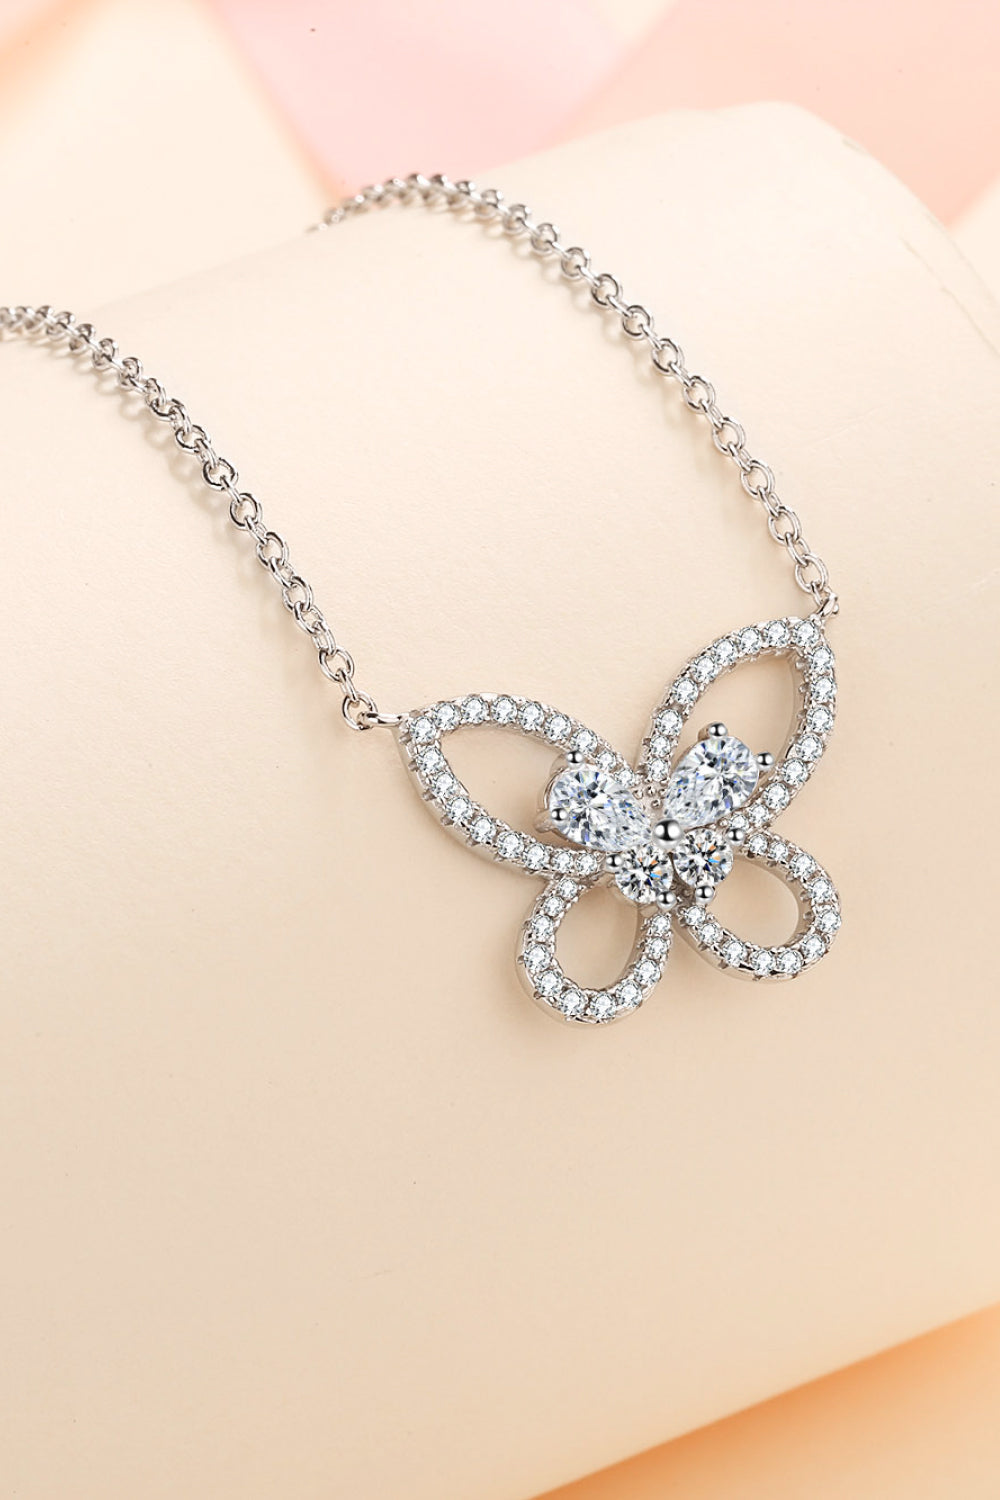 Moissanite Butterfly Pendant Necklace - Necklaces - FITGGINS